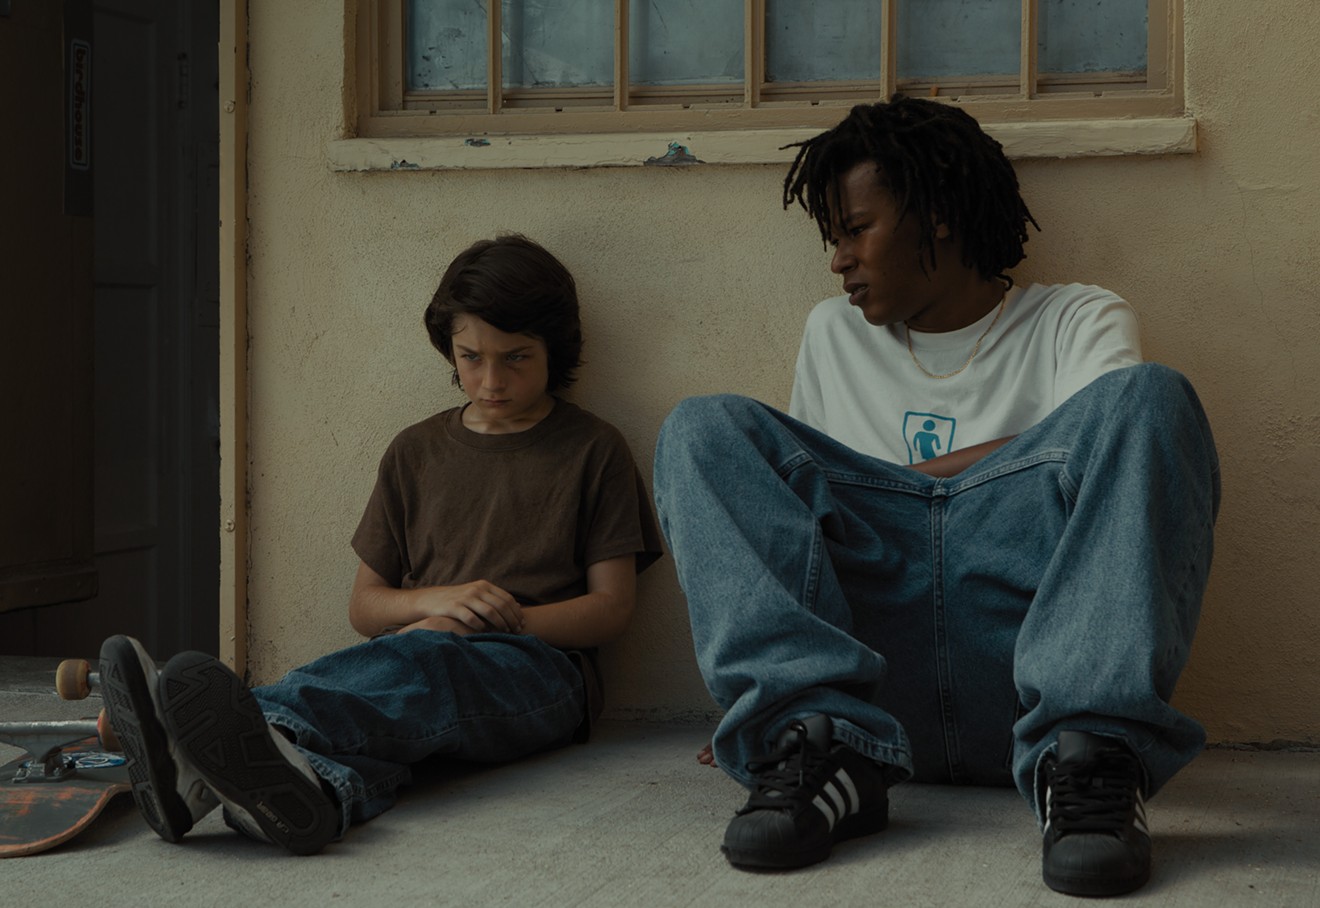 Sunny Suljic (left) plays pint-sized thirteen-year-old Stevie, who eventually connects with some local skater boys he has been observing from afar led by Ray (Na-kel Smith), in Mid90s, a slice-of-life drama from Jonah Hill.